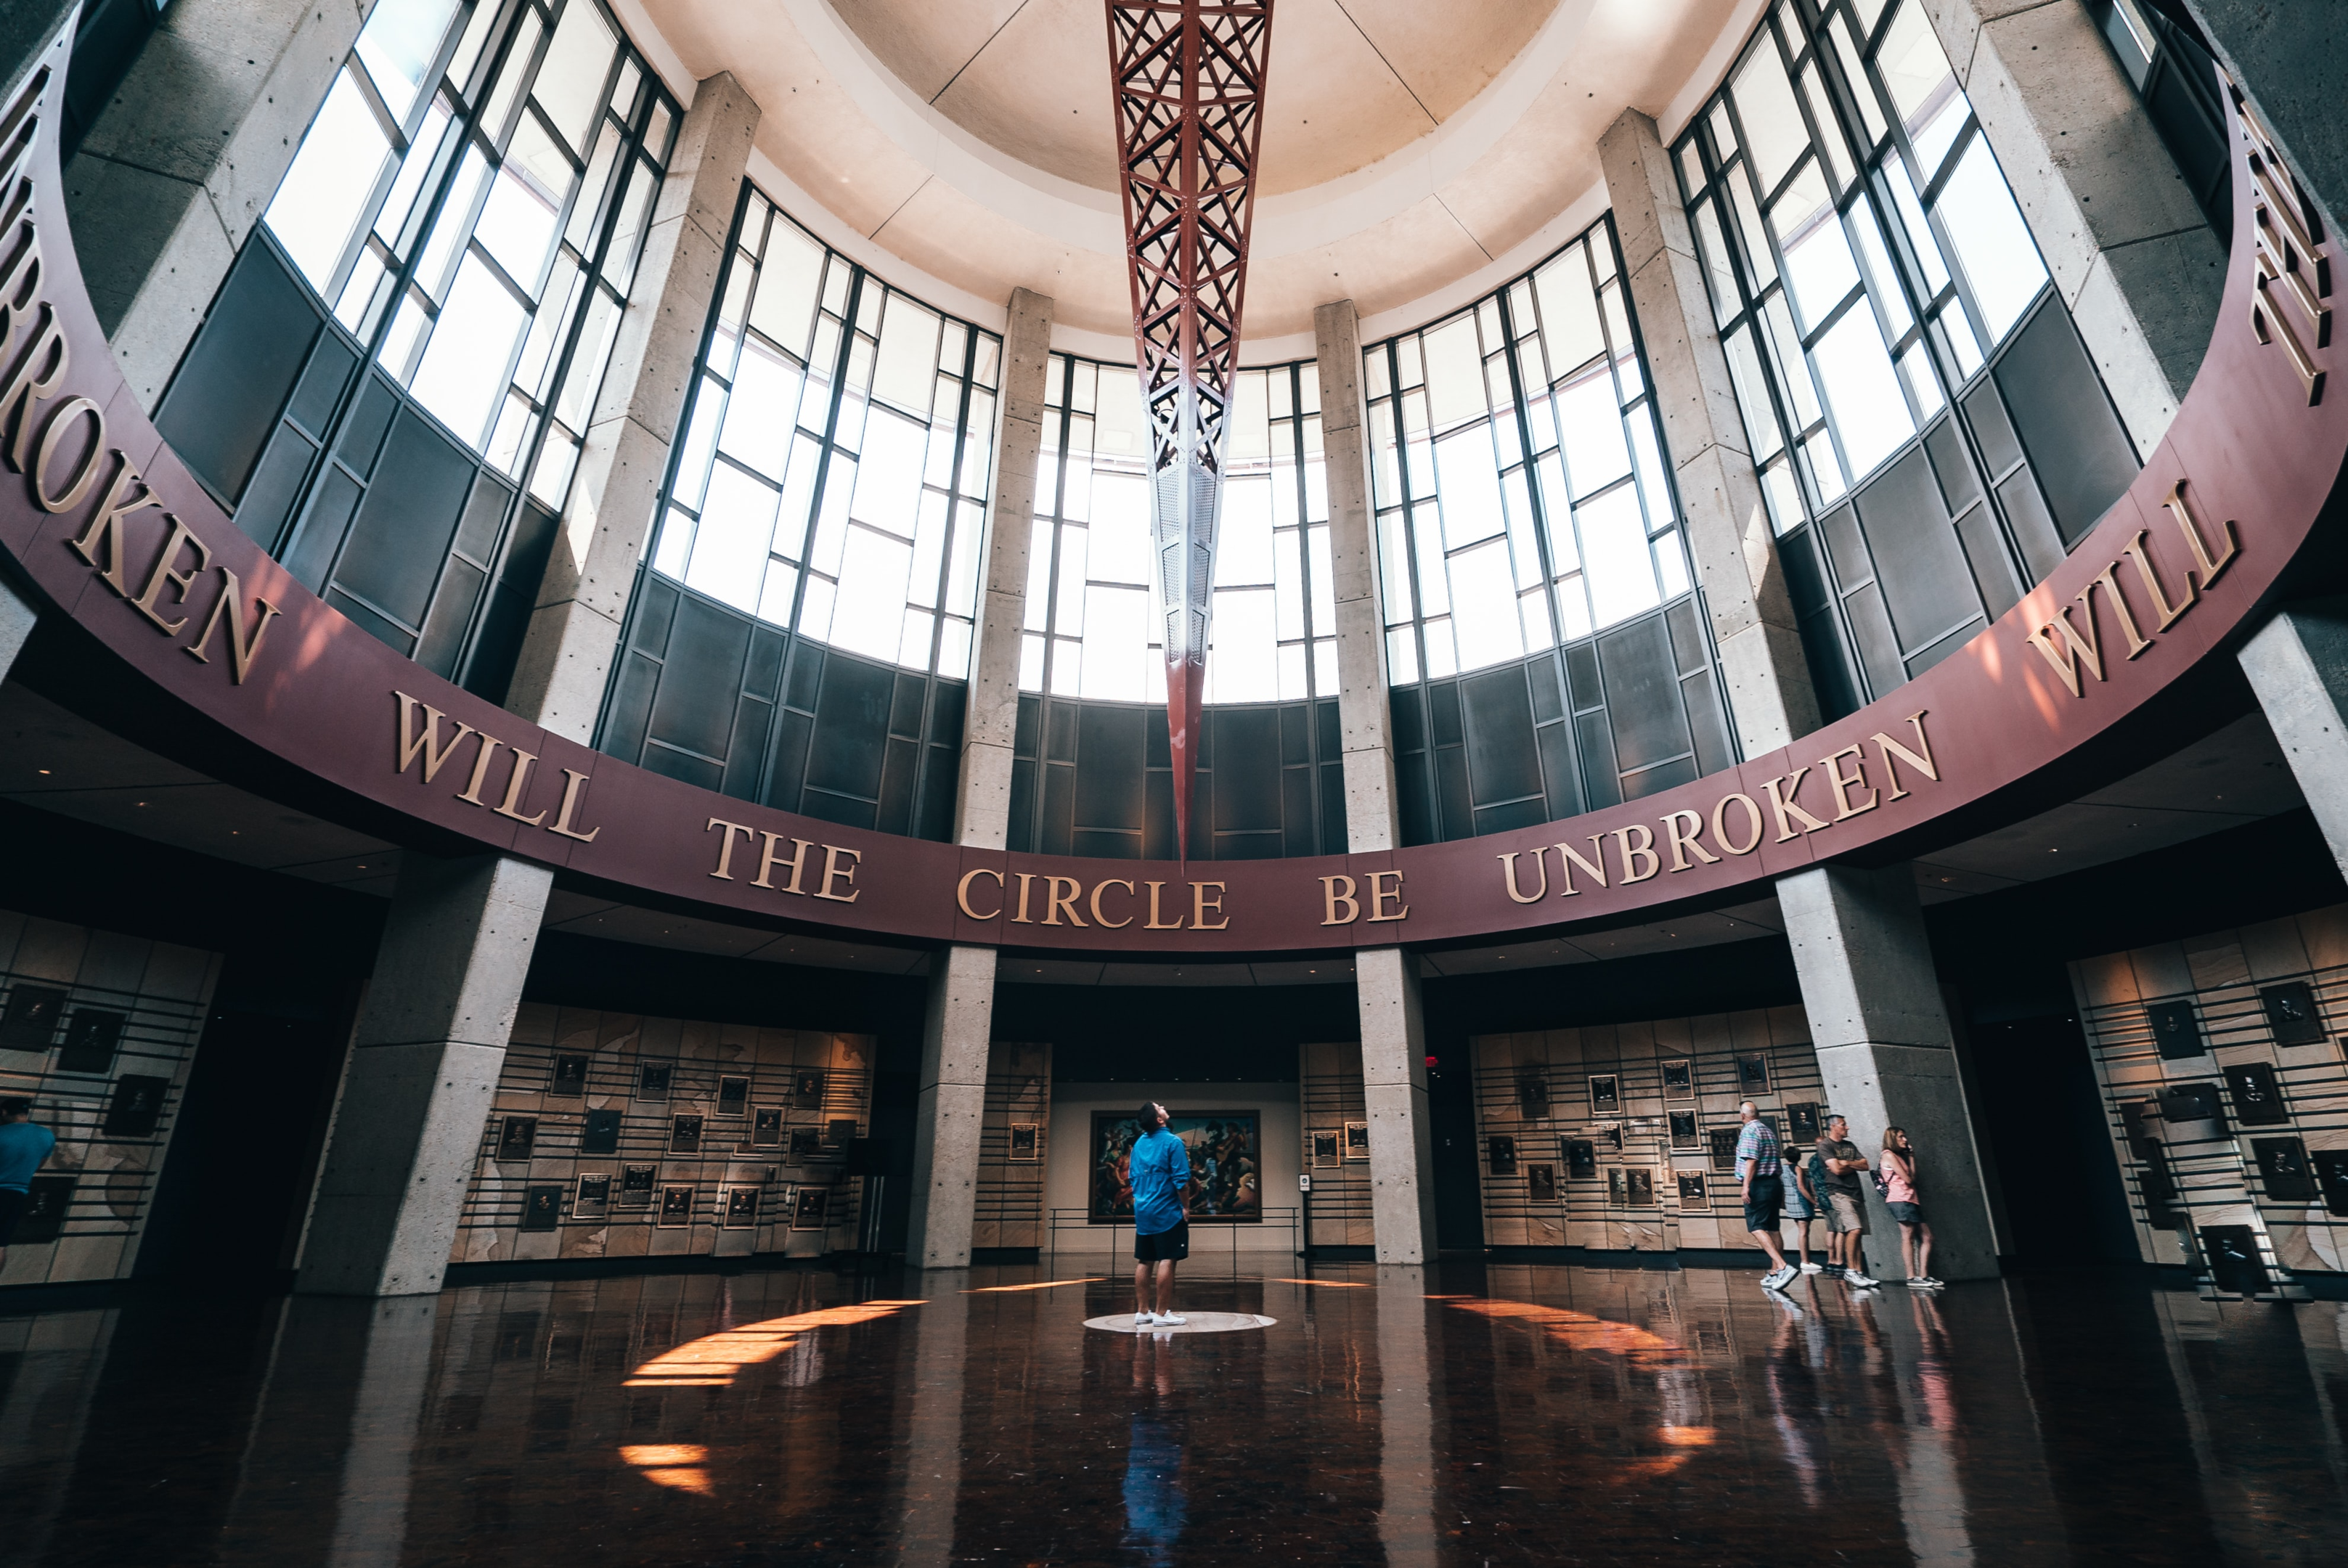 Interior view of the Country Music Hall of Fame and Museum In Nashville TN